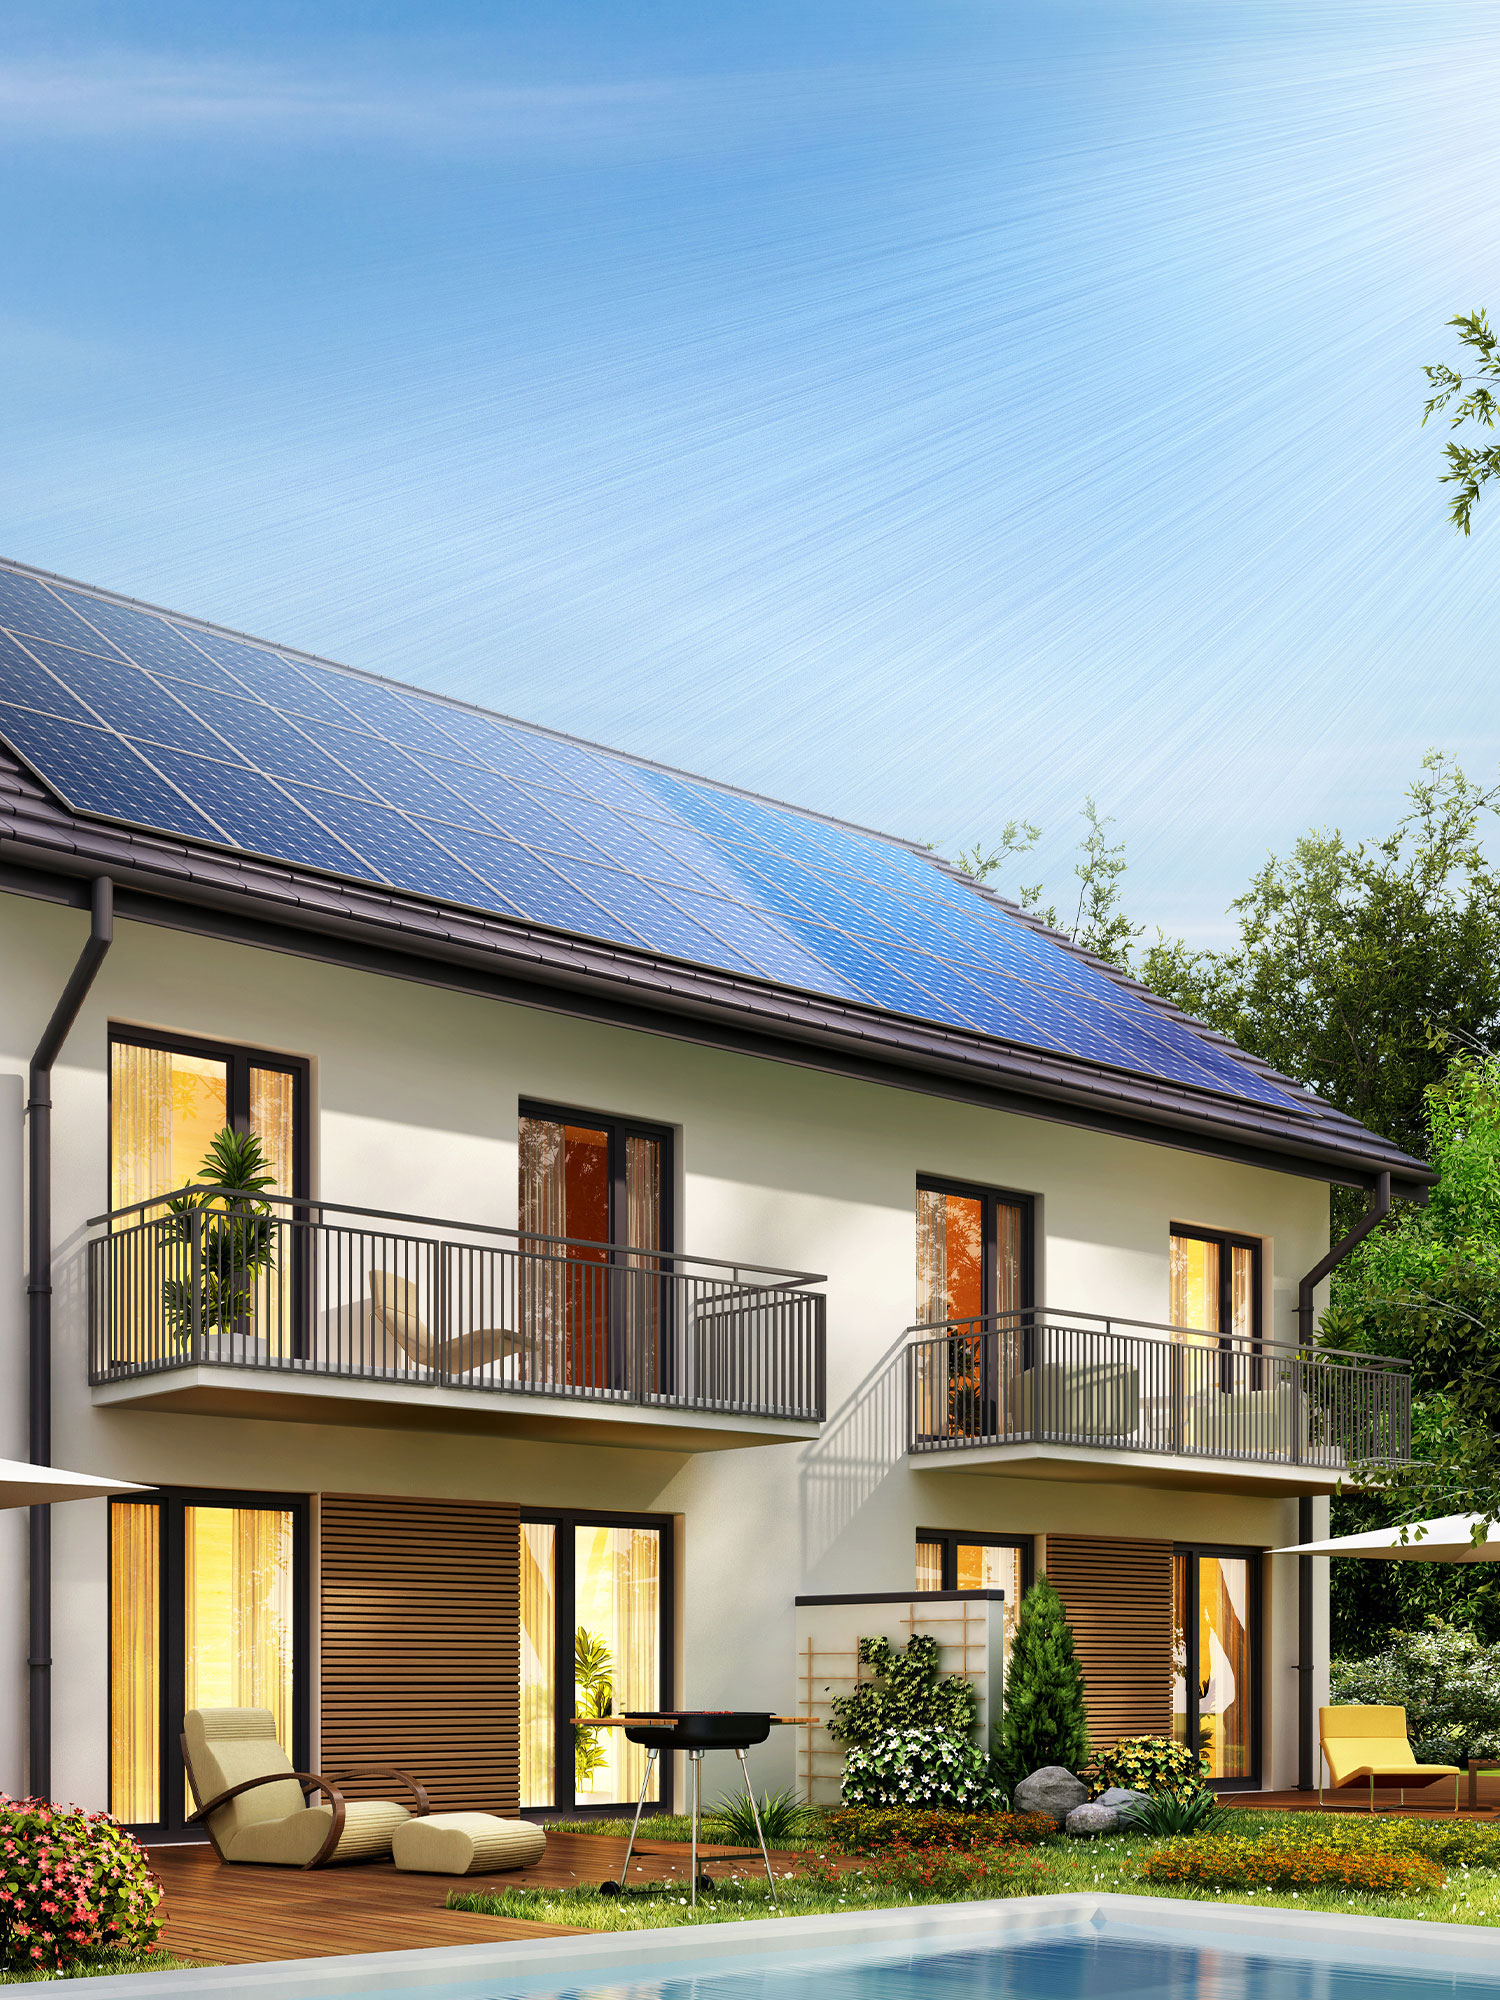 Energy independence for home in St. George is easy with SunPower by Custom Energy.